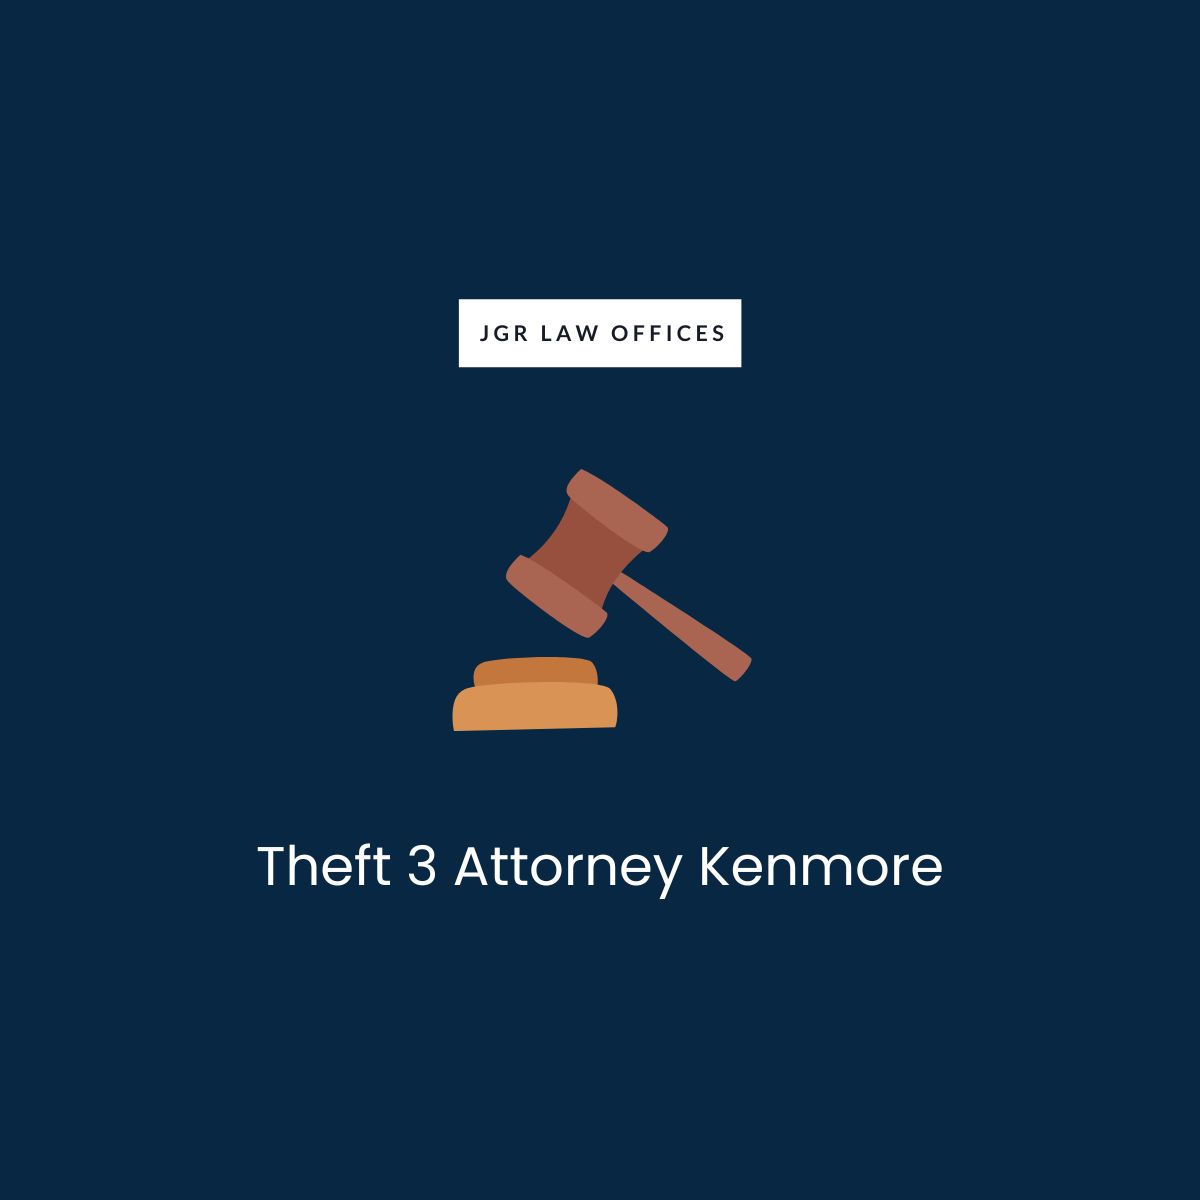 Theft 3 Attorney Kenmore